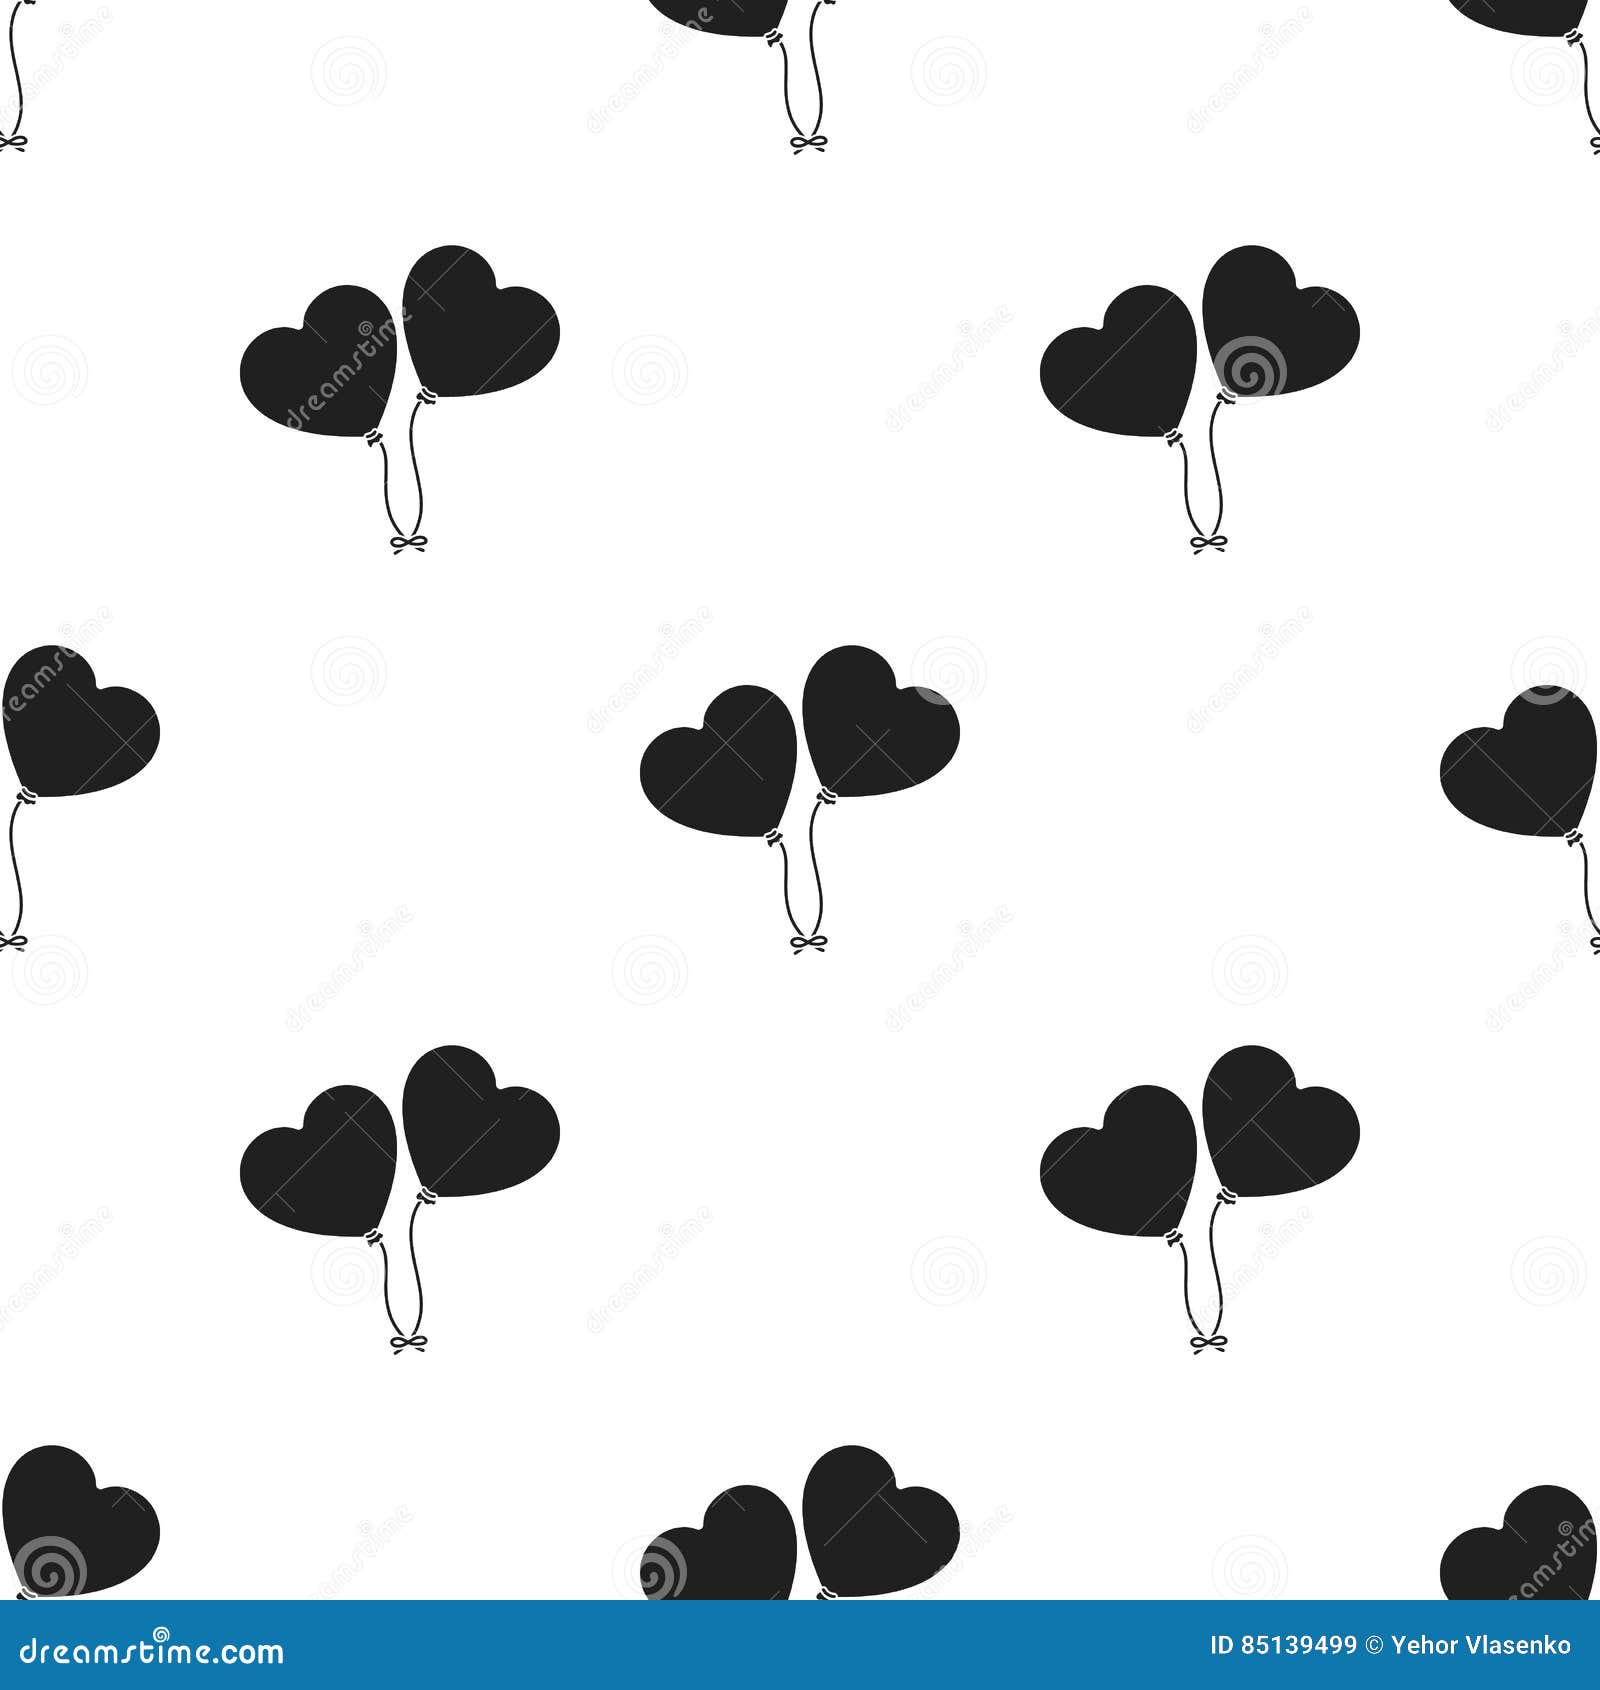 Baloons Icon In Black Style Isolated On White Background. Romantic